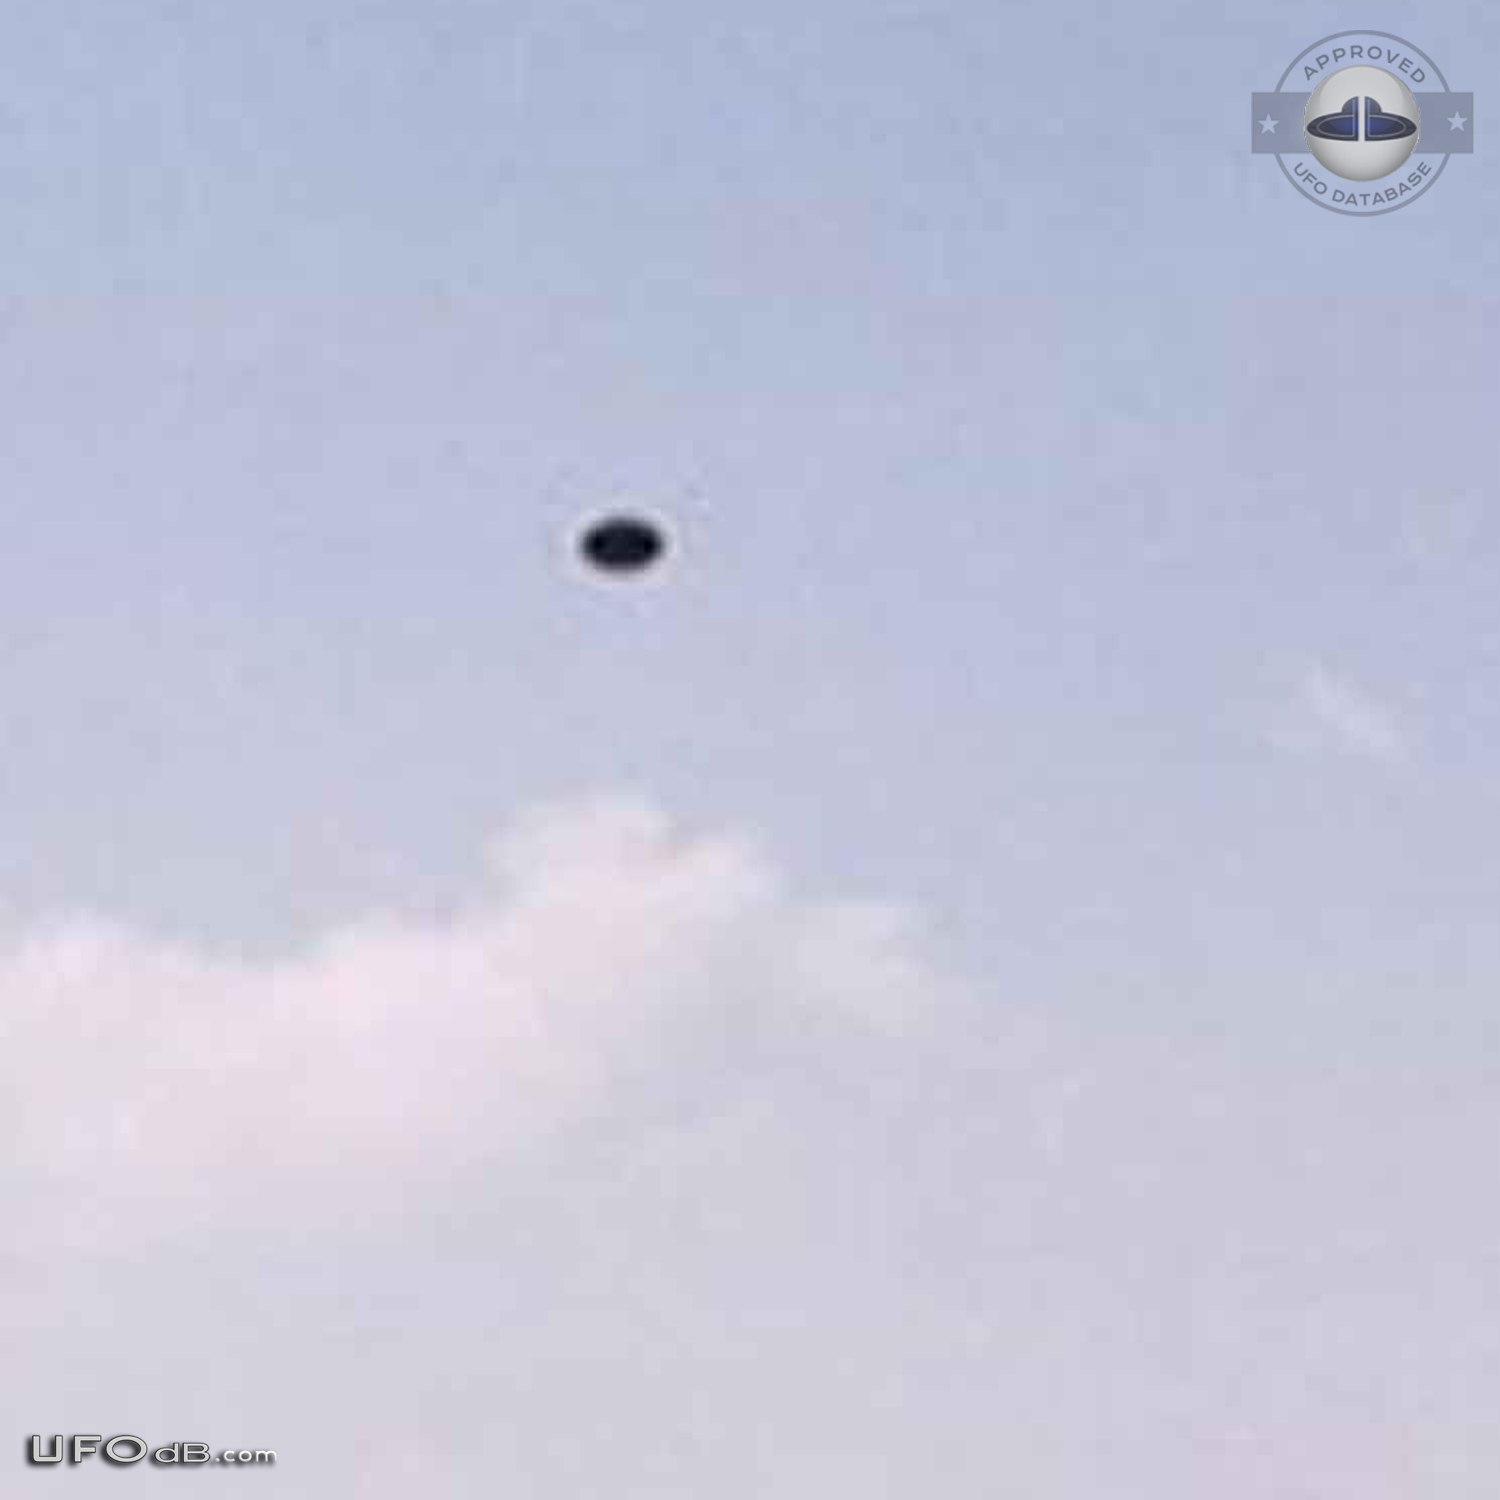 Poland 2003 Ufo sighting get aircrafts dispatched to check out the ufo UFO Picture #379-4